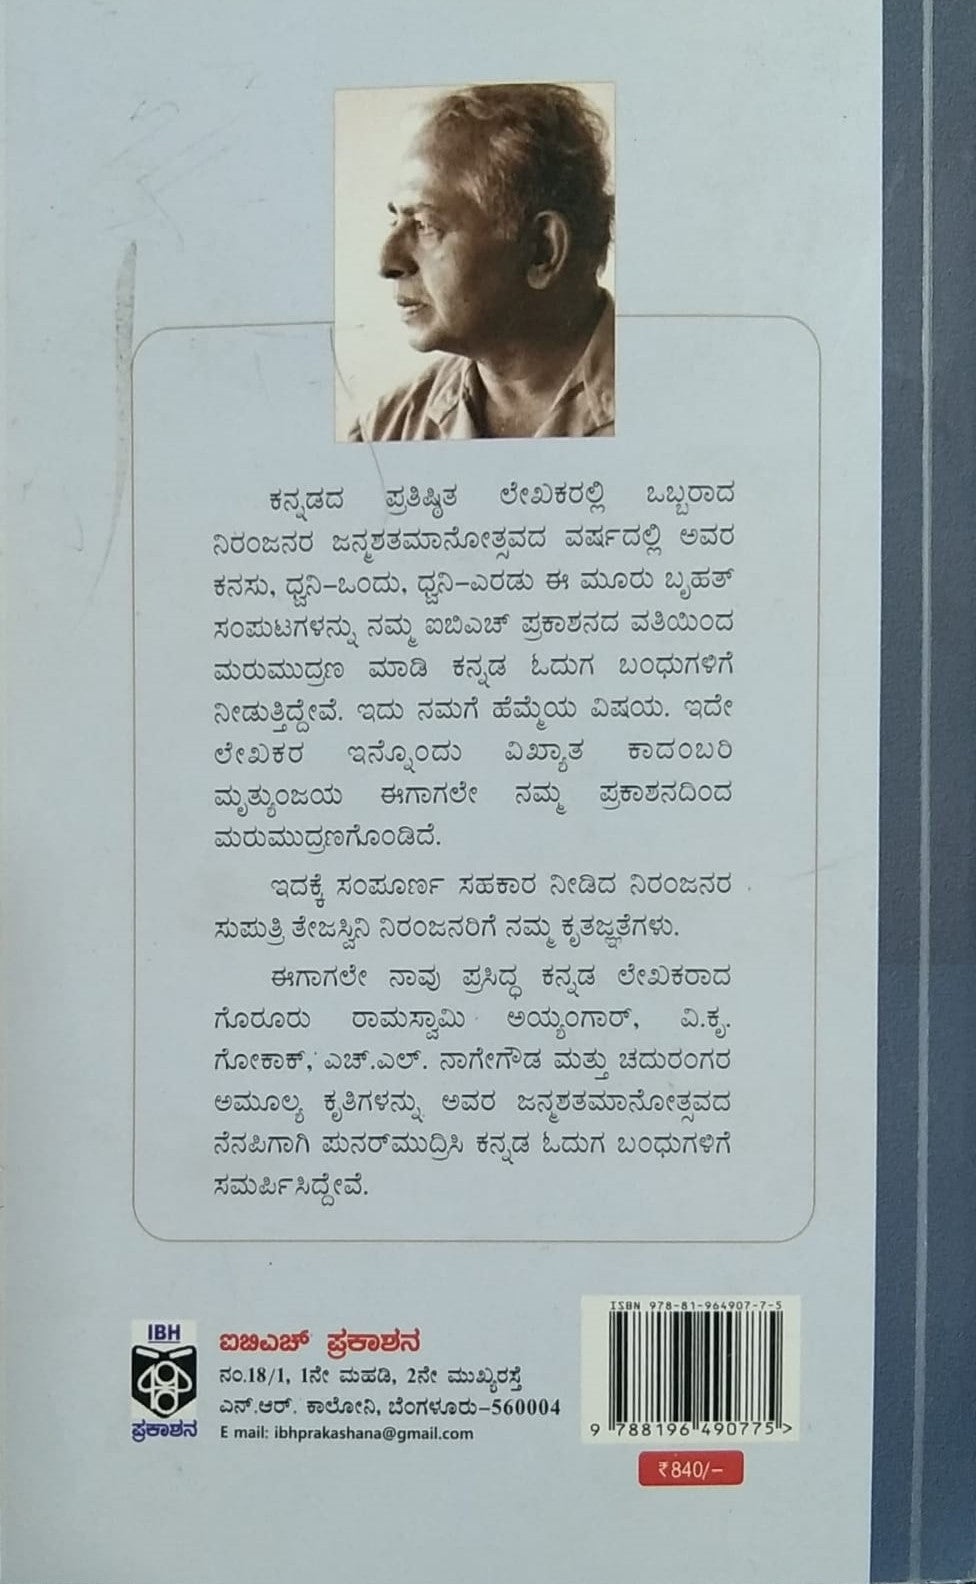 Collection of Stories, Niranjana one of the famous Kannada Writer